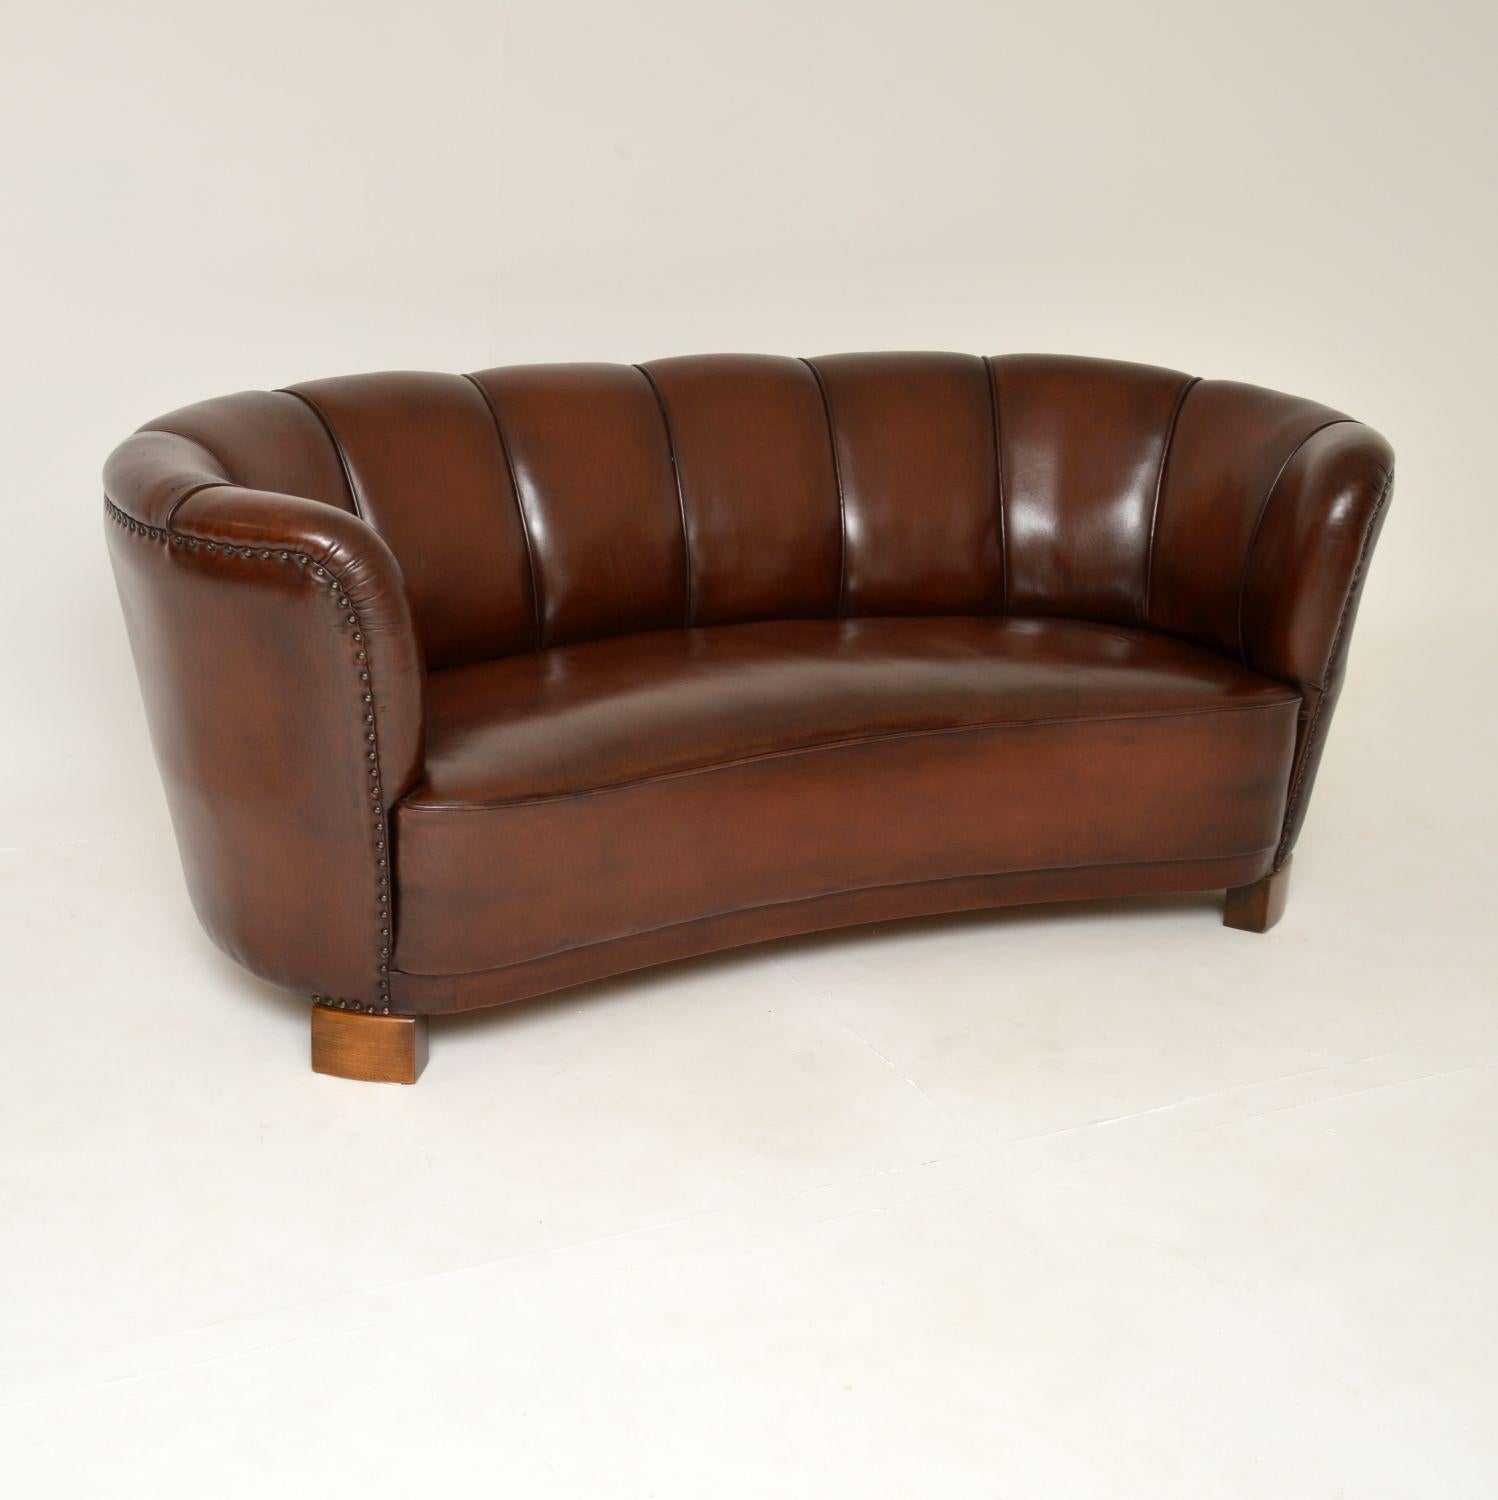 An absolutely gorgeous original Danish vintage curved banana sofa in brown leather. This was recently imported from Denmark, it dates from the 1940-50’s.

The quality is superb, this is so well built and is very comfortable. It is unusual to find